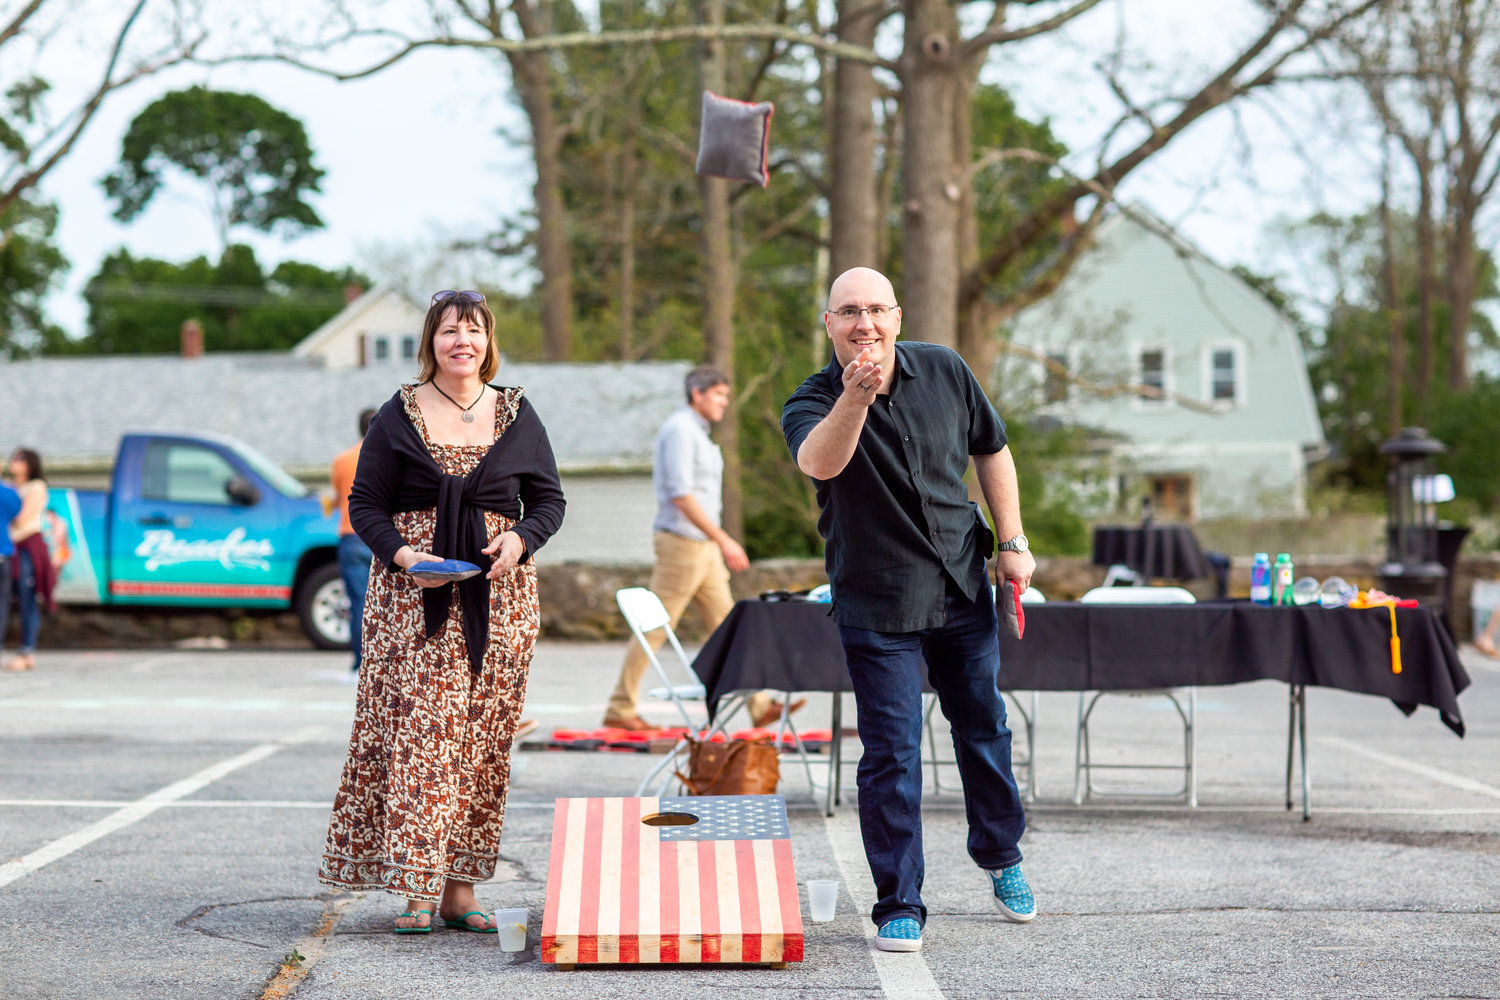 Jen and Jay Rainone enjoy a game of cornhole at the Bristol Warren Education Foundation’s first in-person fundraiser since 2019.